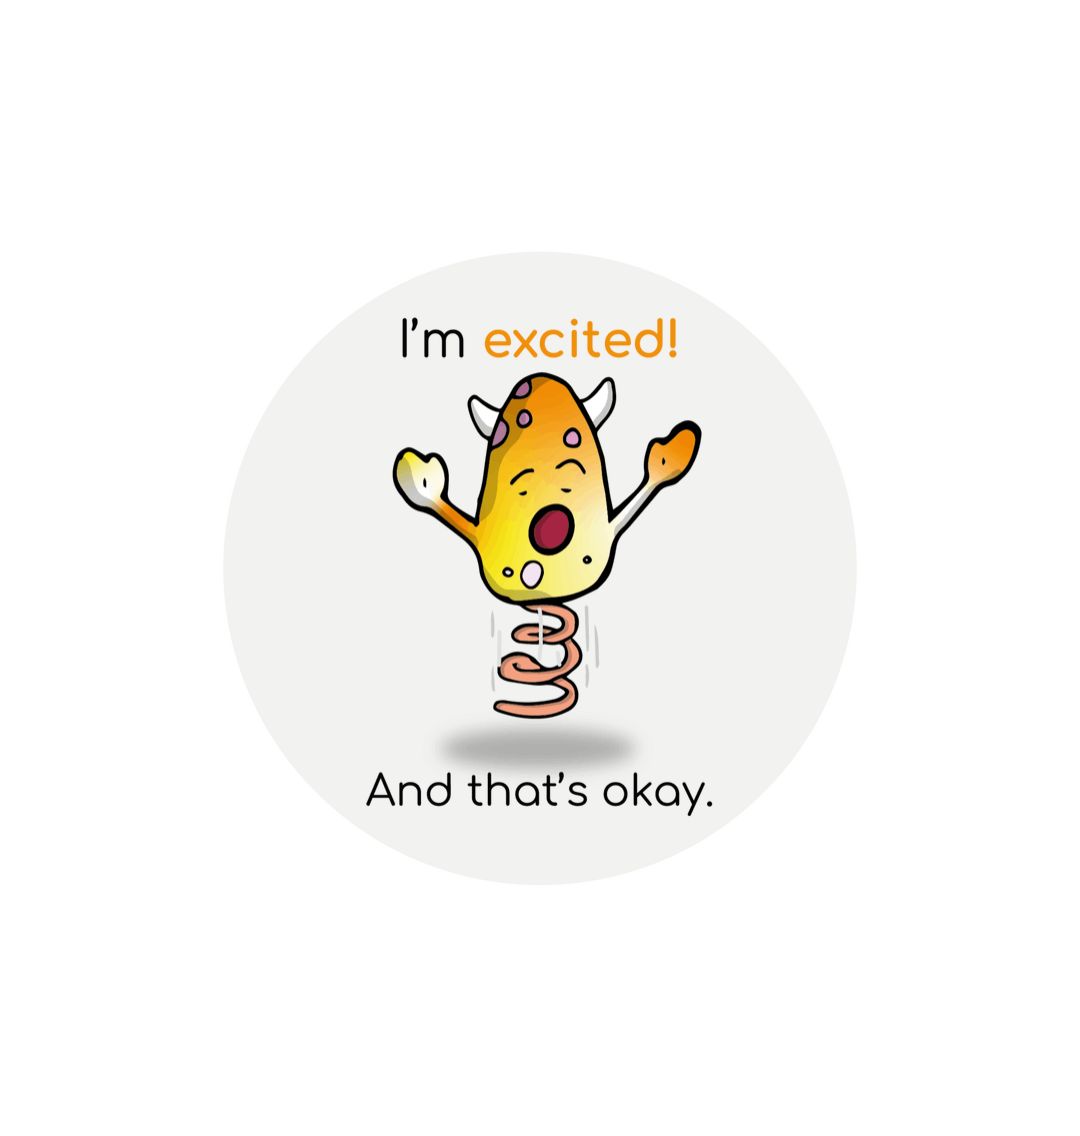 White \"I'm excited! And that's okay!\" Round Children's Emotions Sticker 60mm x 60mm